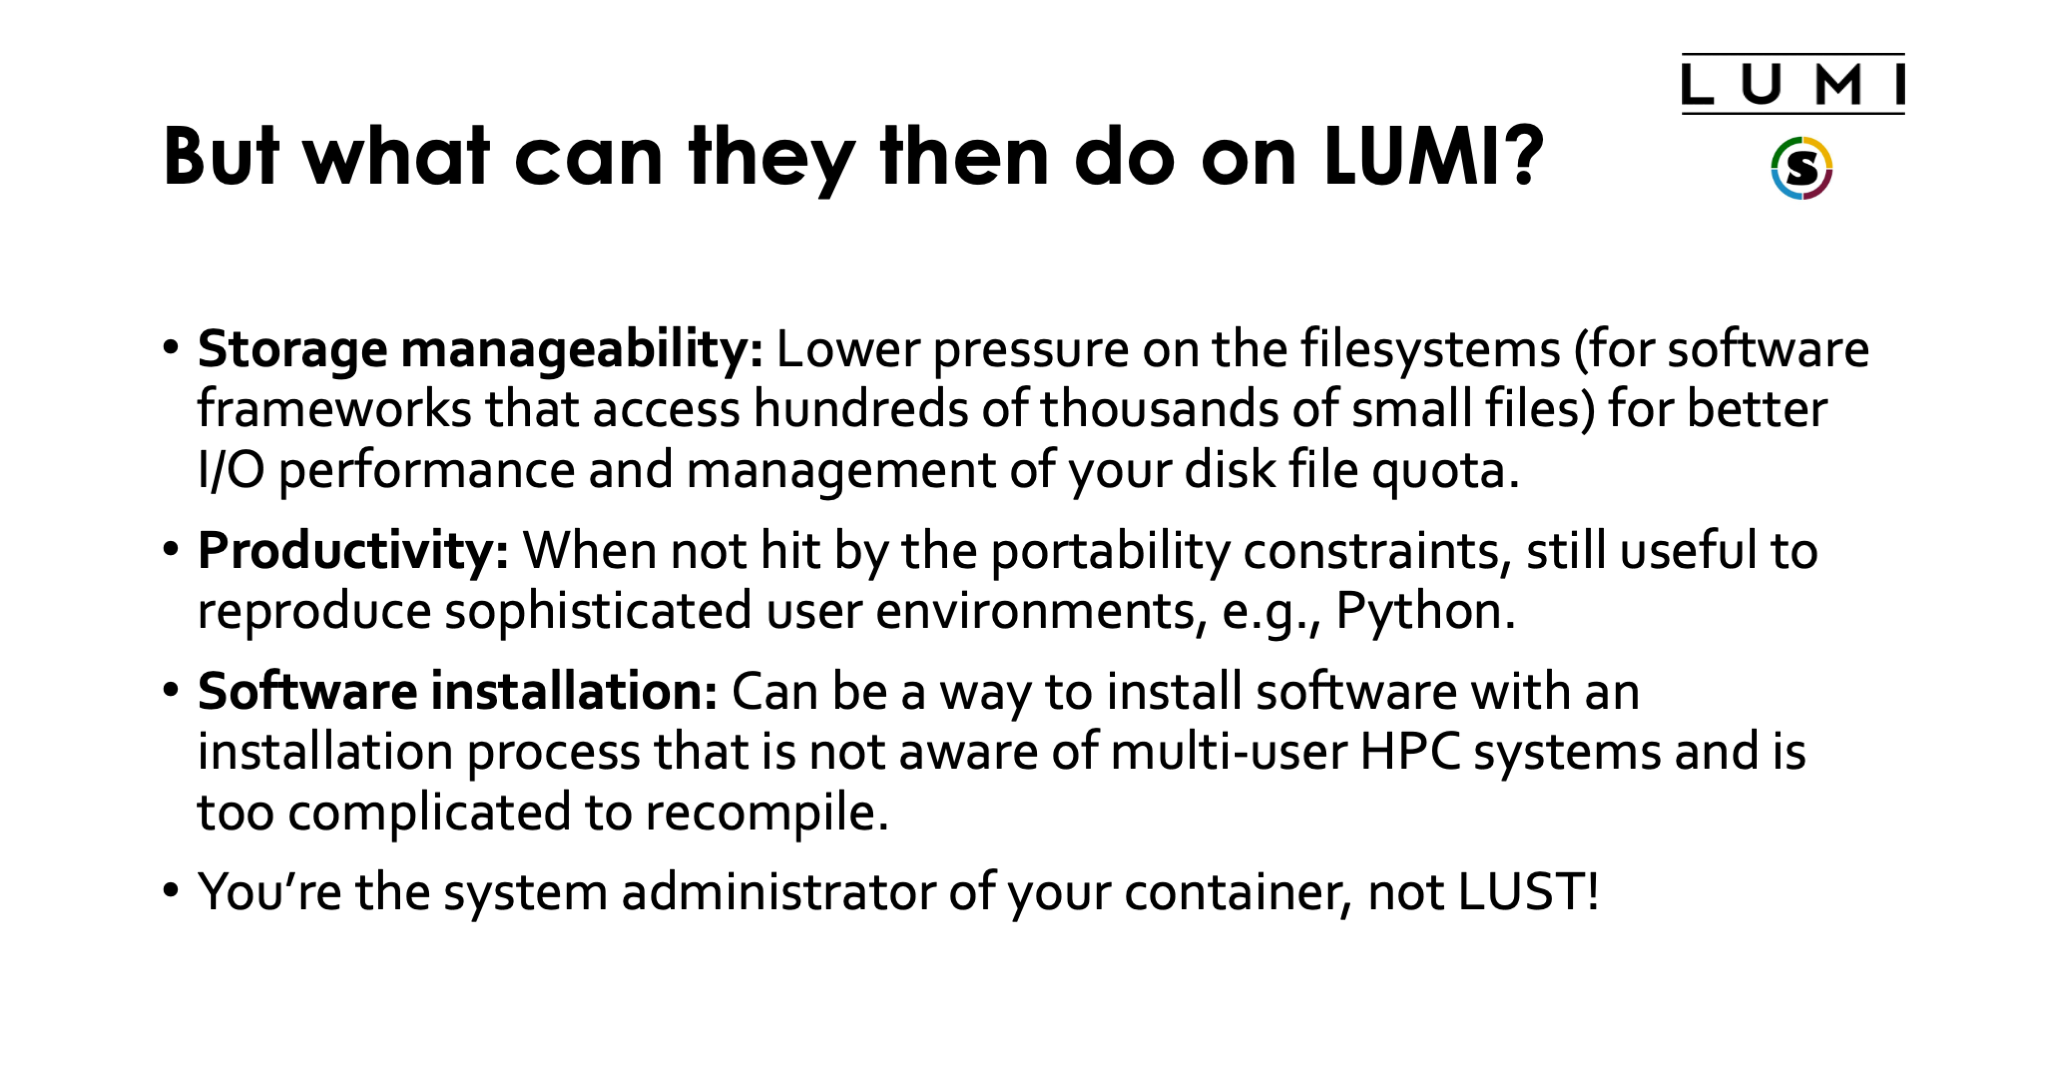 But what can they then do on LUMI?